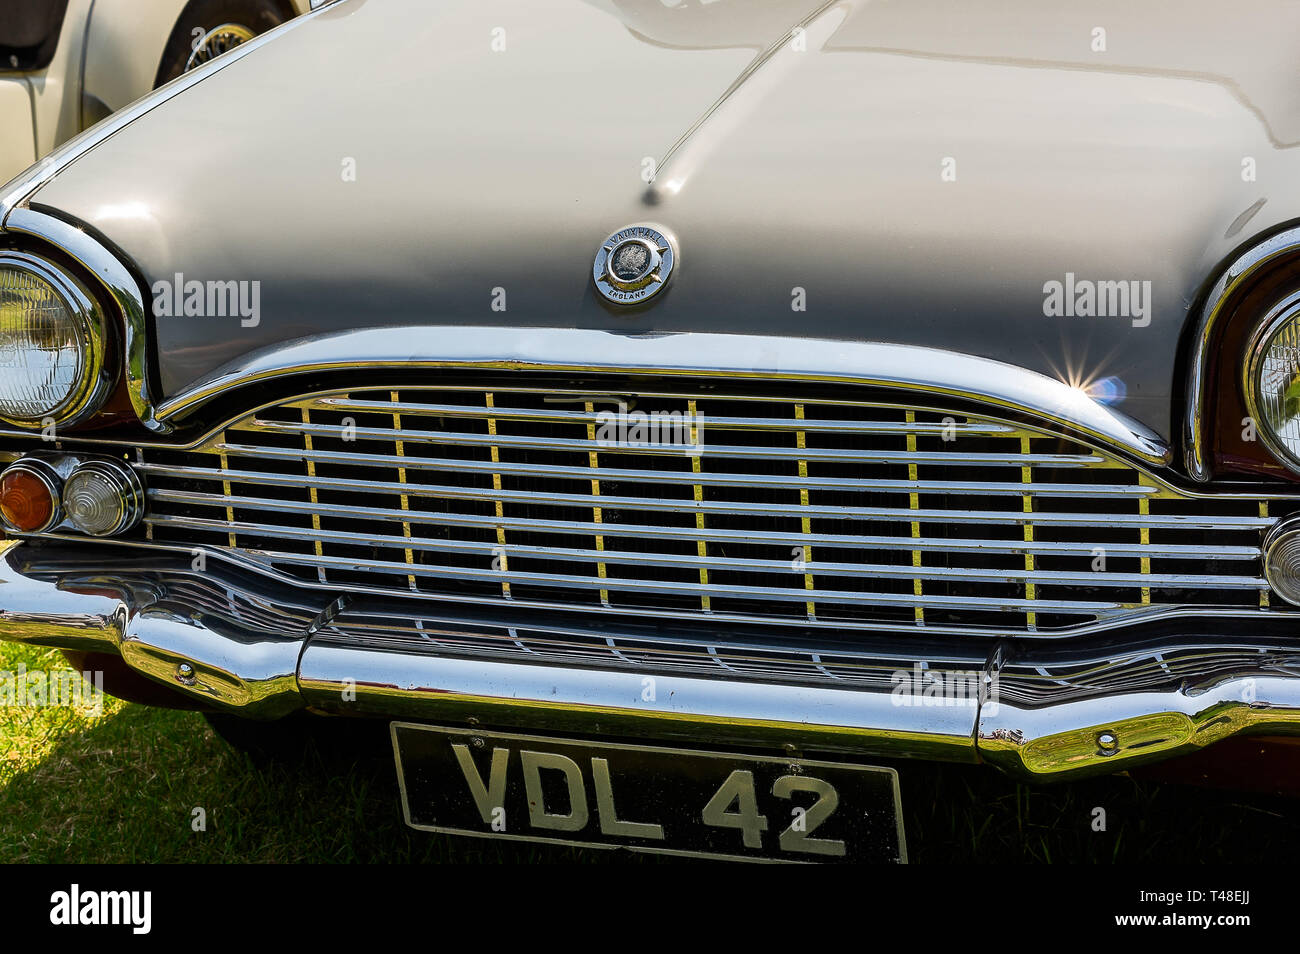 A 1960 Vauxhall Velox on display at a car show Stock Photo